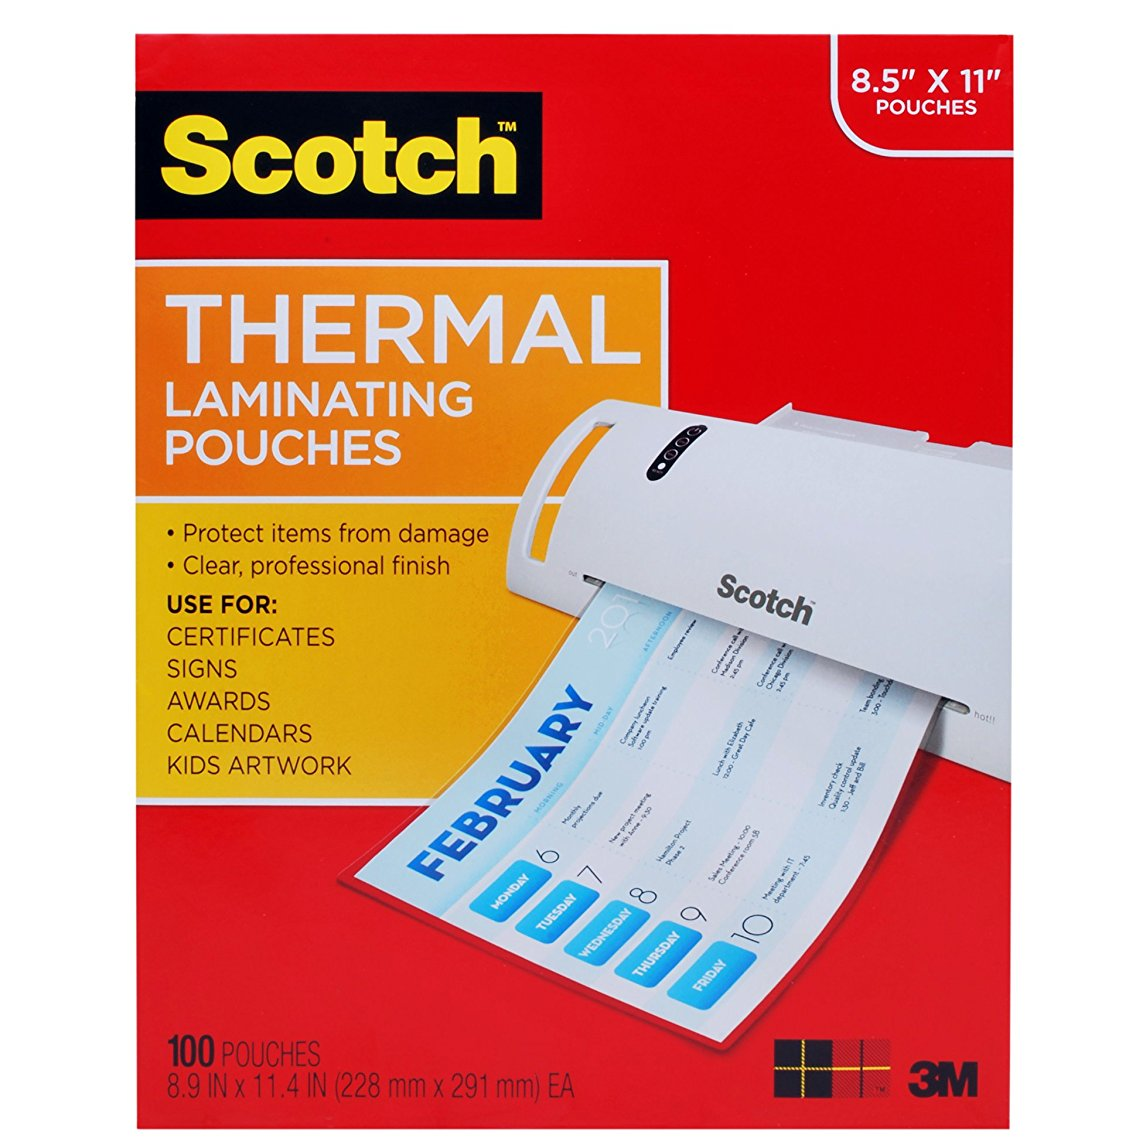 Scotch Thermal Laminating Pouches 100 Pack Only $9.99! (Reg $24)